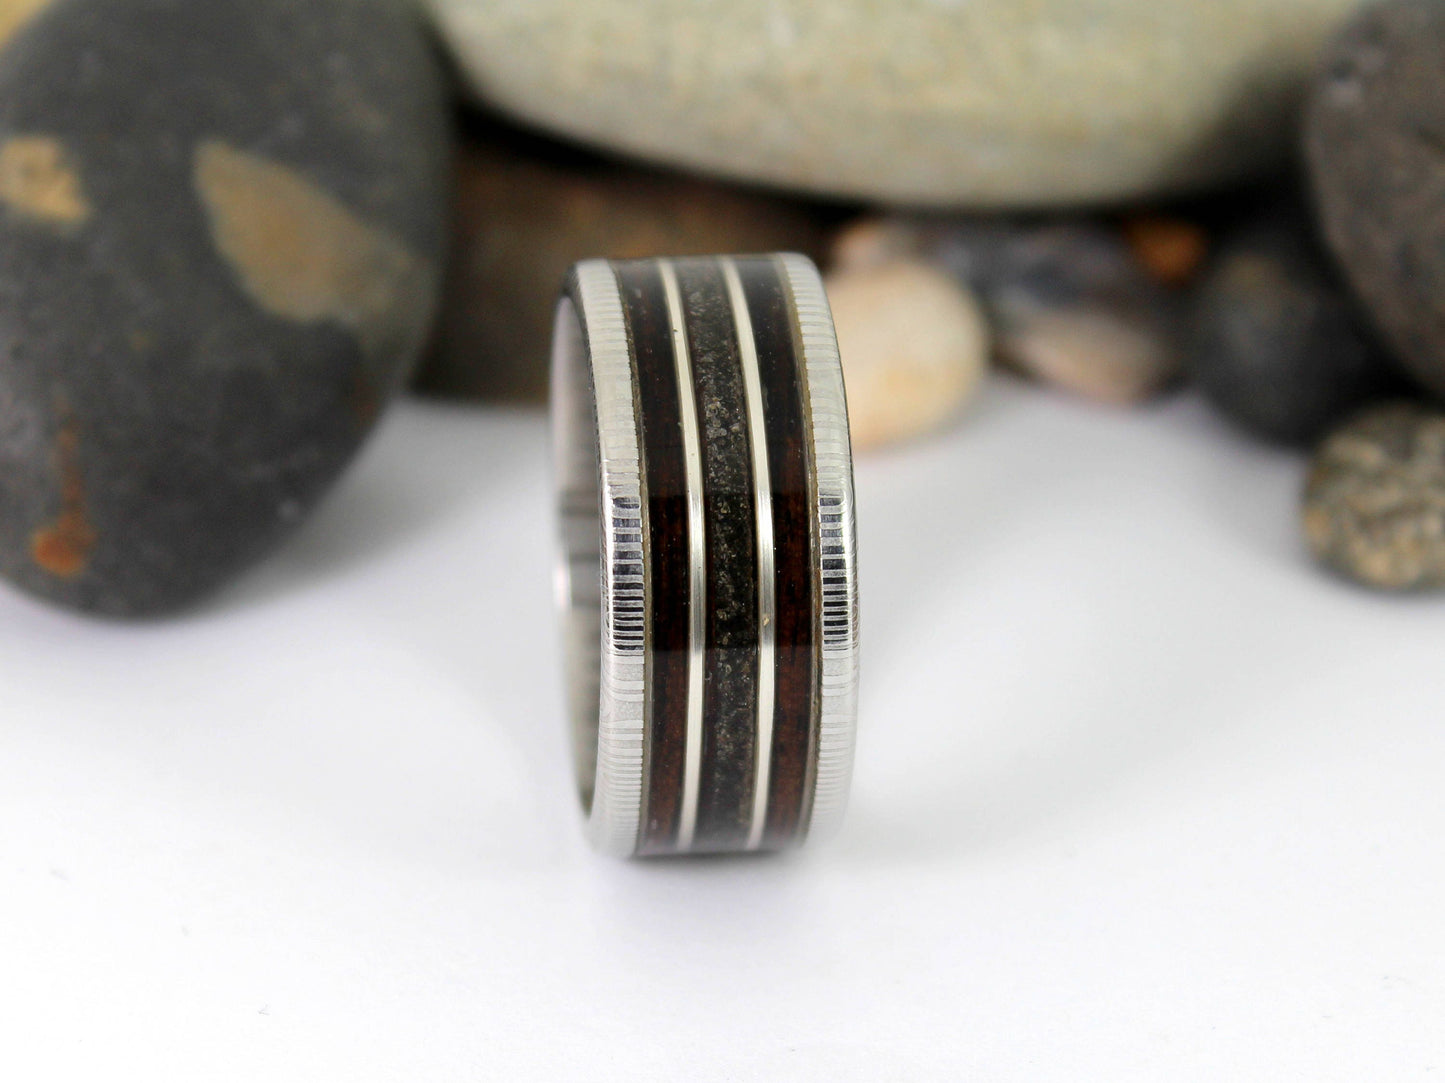 Damascus Steel Ring With Megalodon Tooth, Silver and Wood Inlay